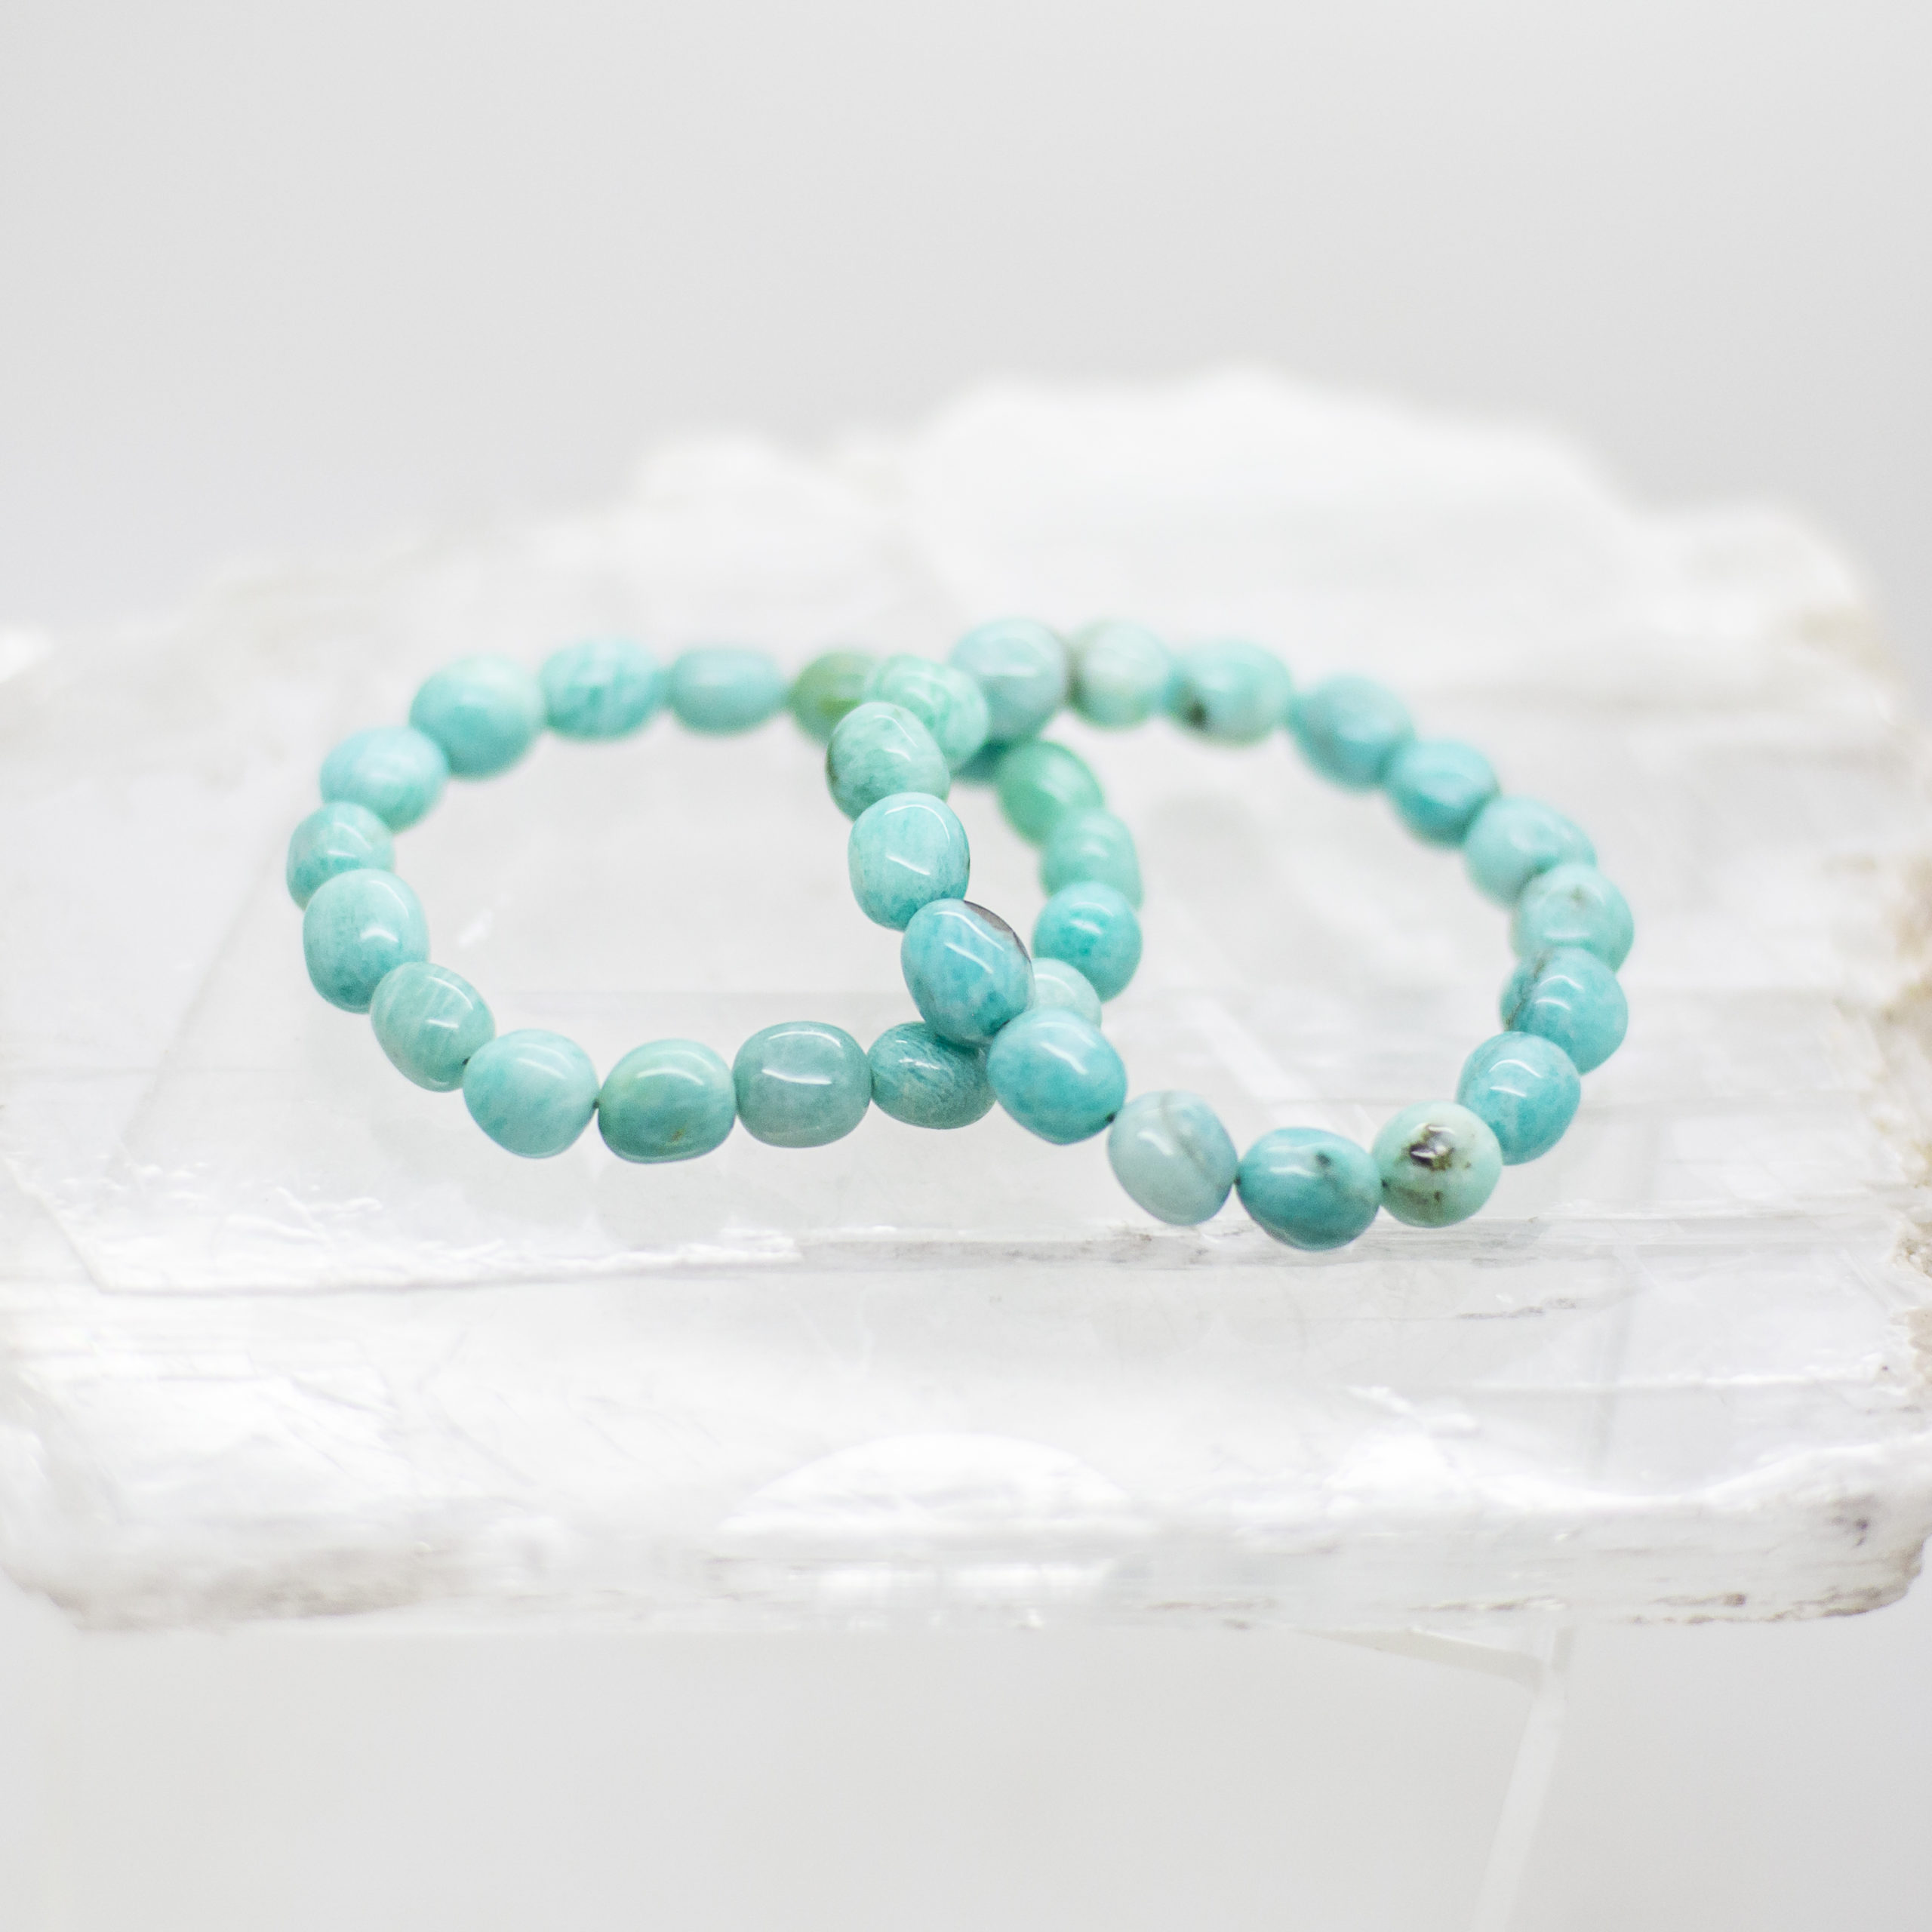 Amazonite Beaded Bracelet With 4 Inch Beads And Natural Amazonite Ston –  Turquoise Trading Co